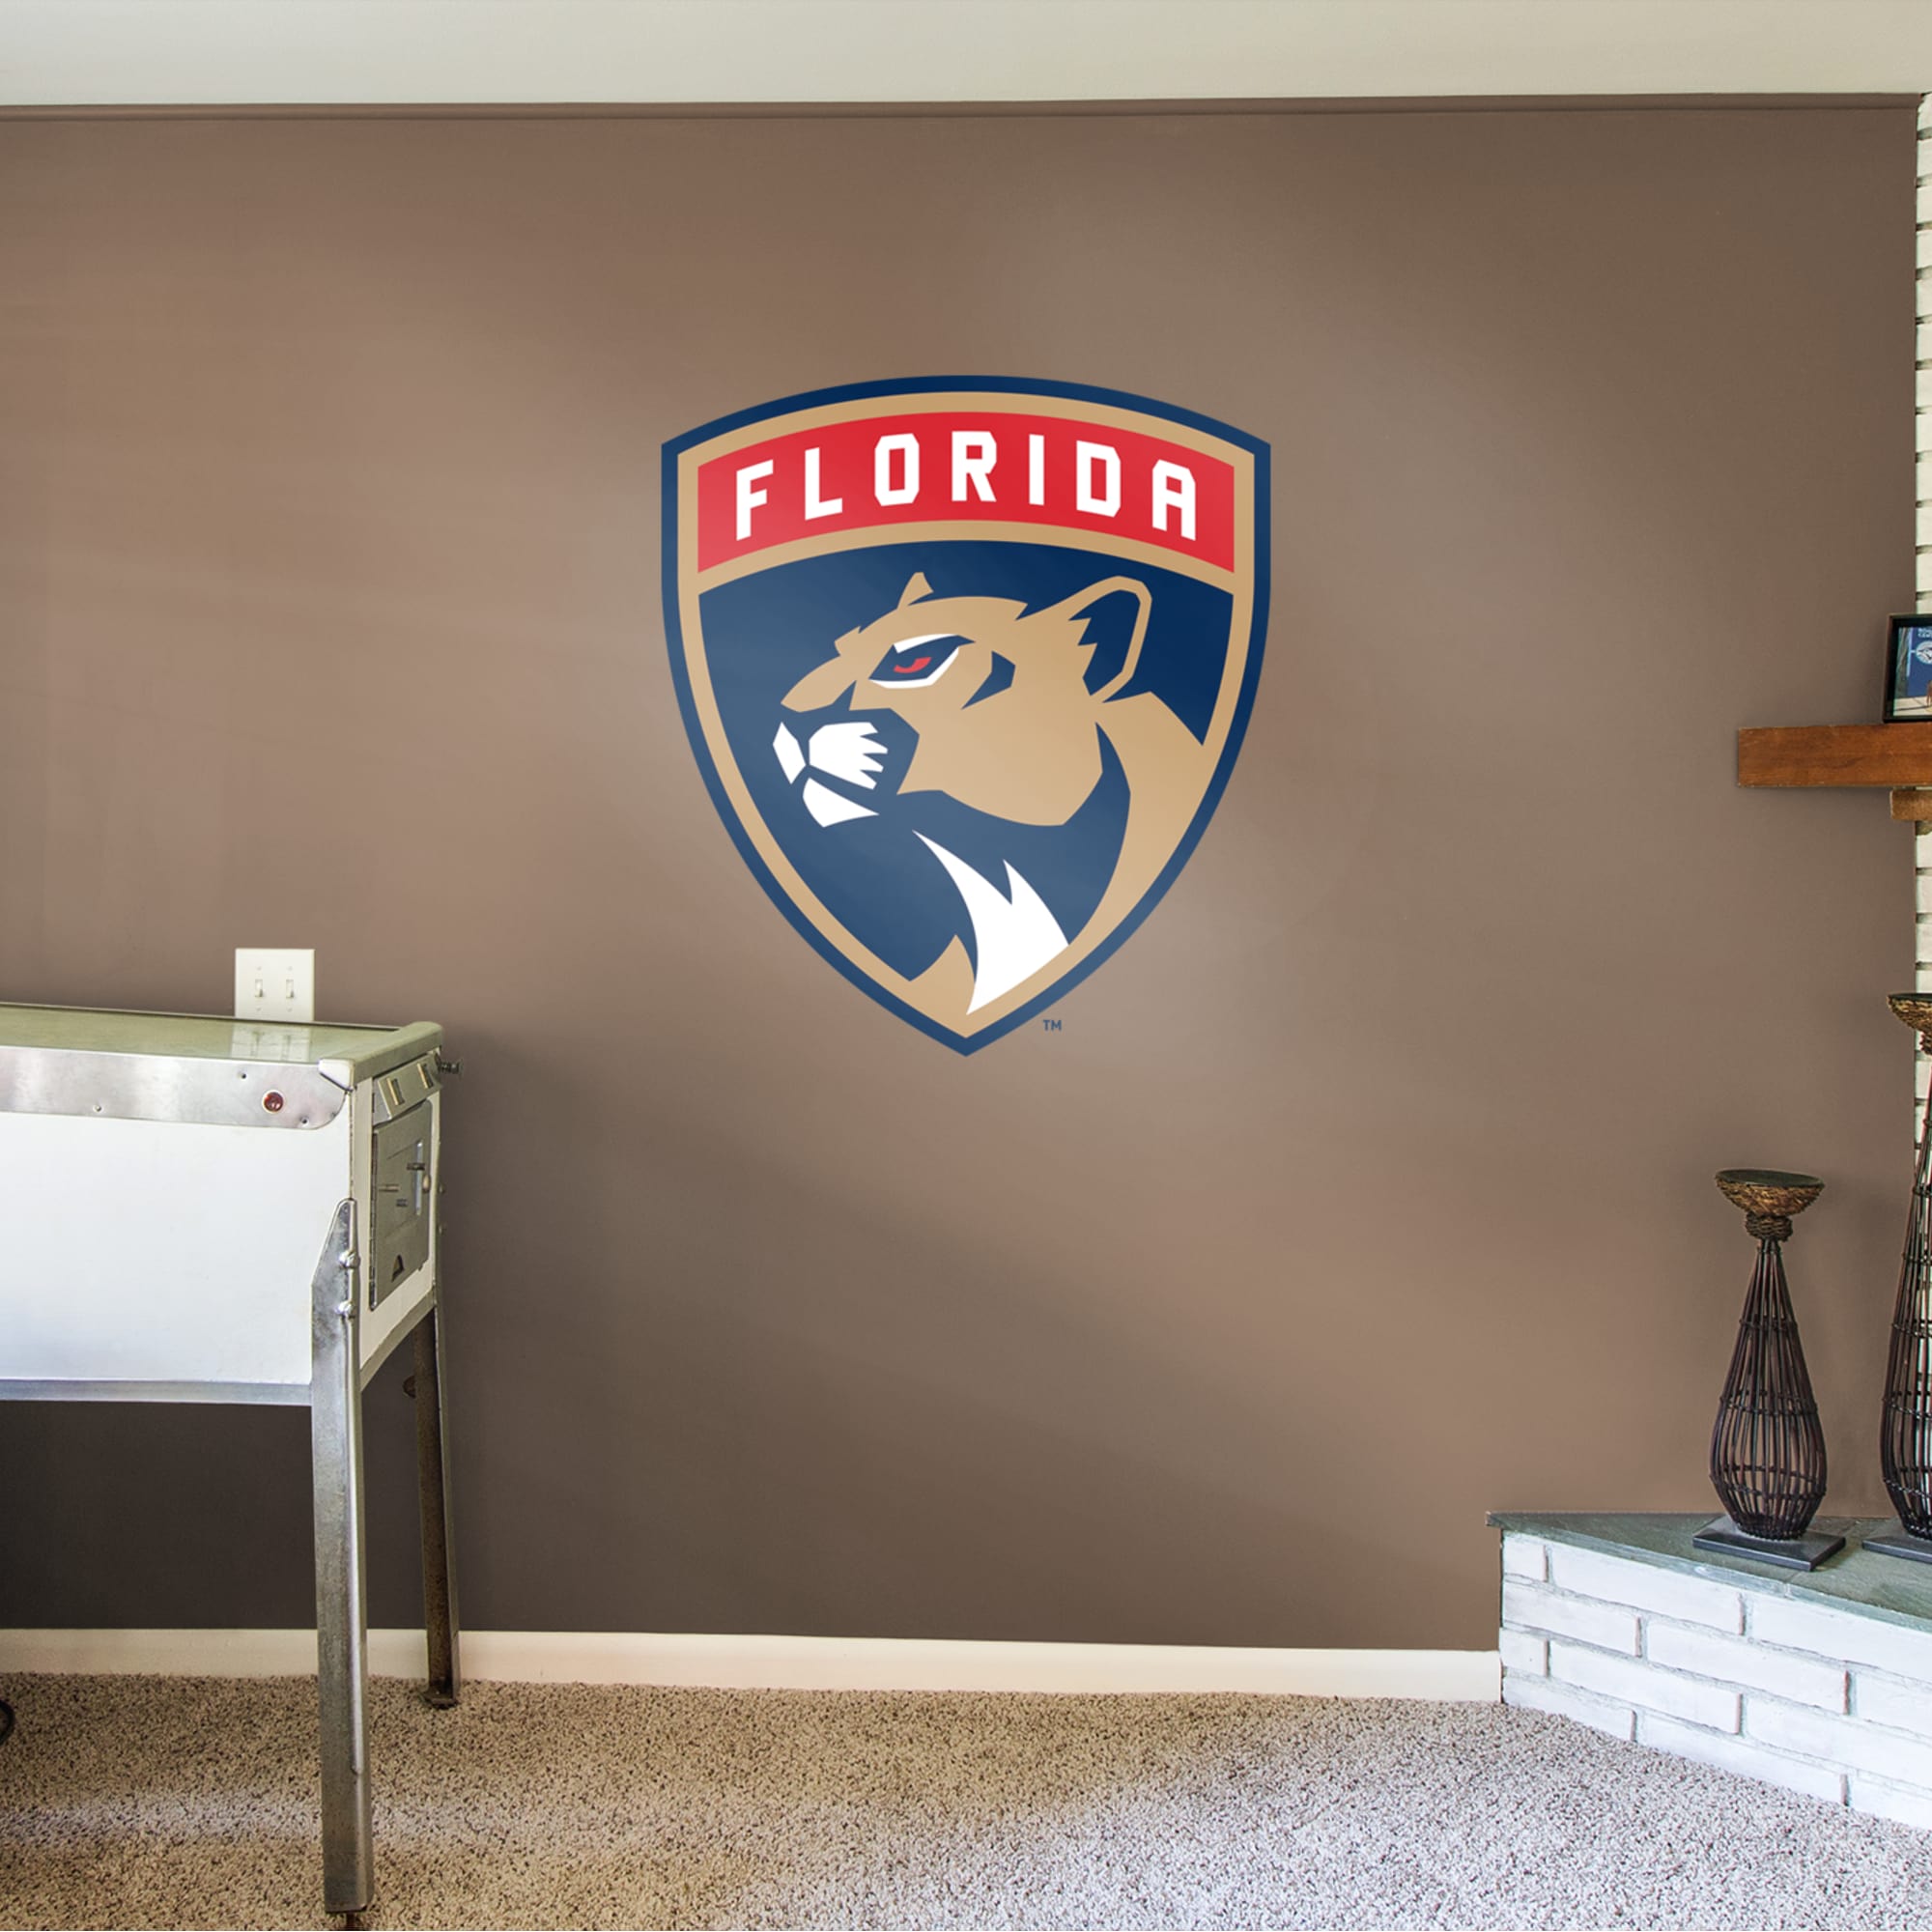 Florida Panthers: Logo - Officially Licensed NHL Removable Wall Decal 38.0"W x 43.0"H by Fathead | Vinyl